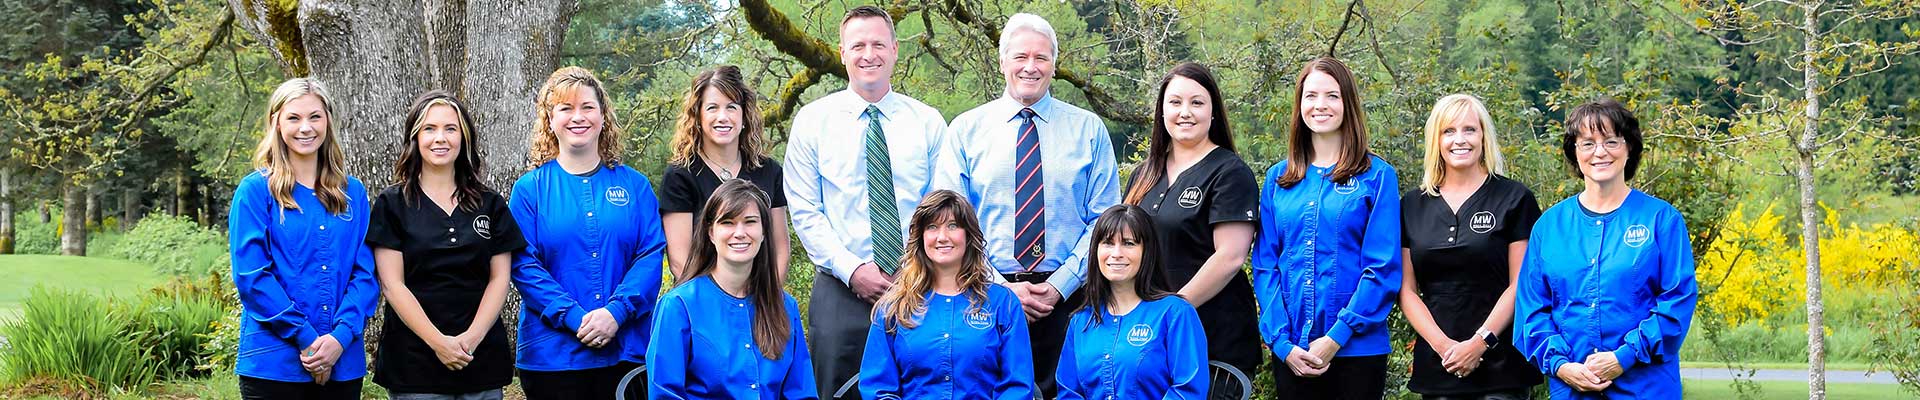 Our Team Image Moss Wall Orthodontics in Lacey WA